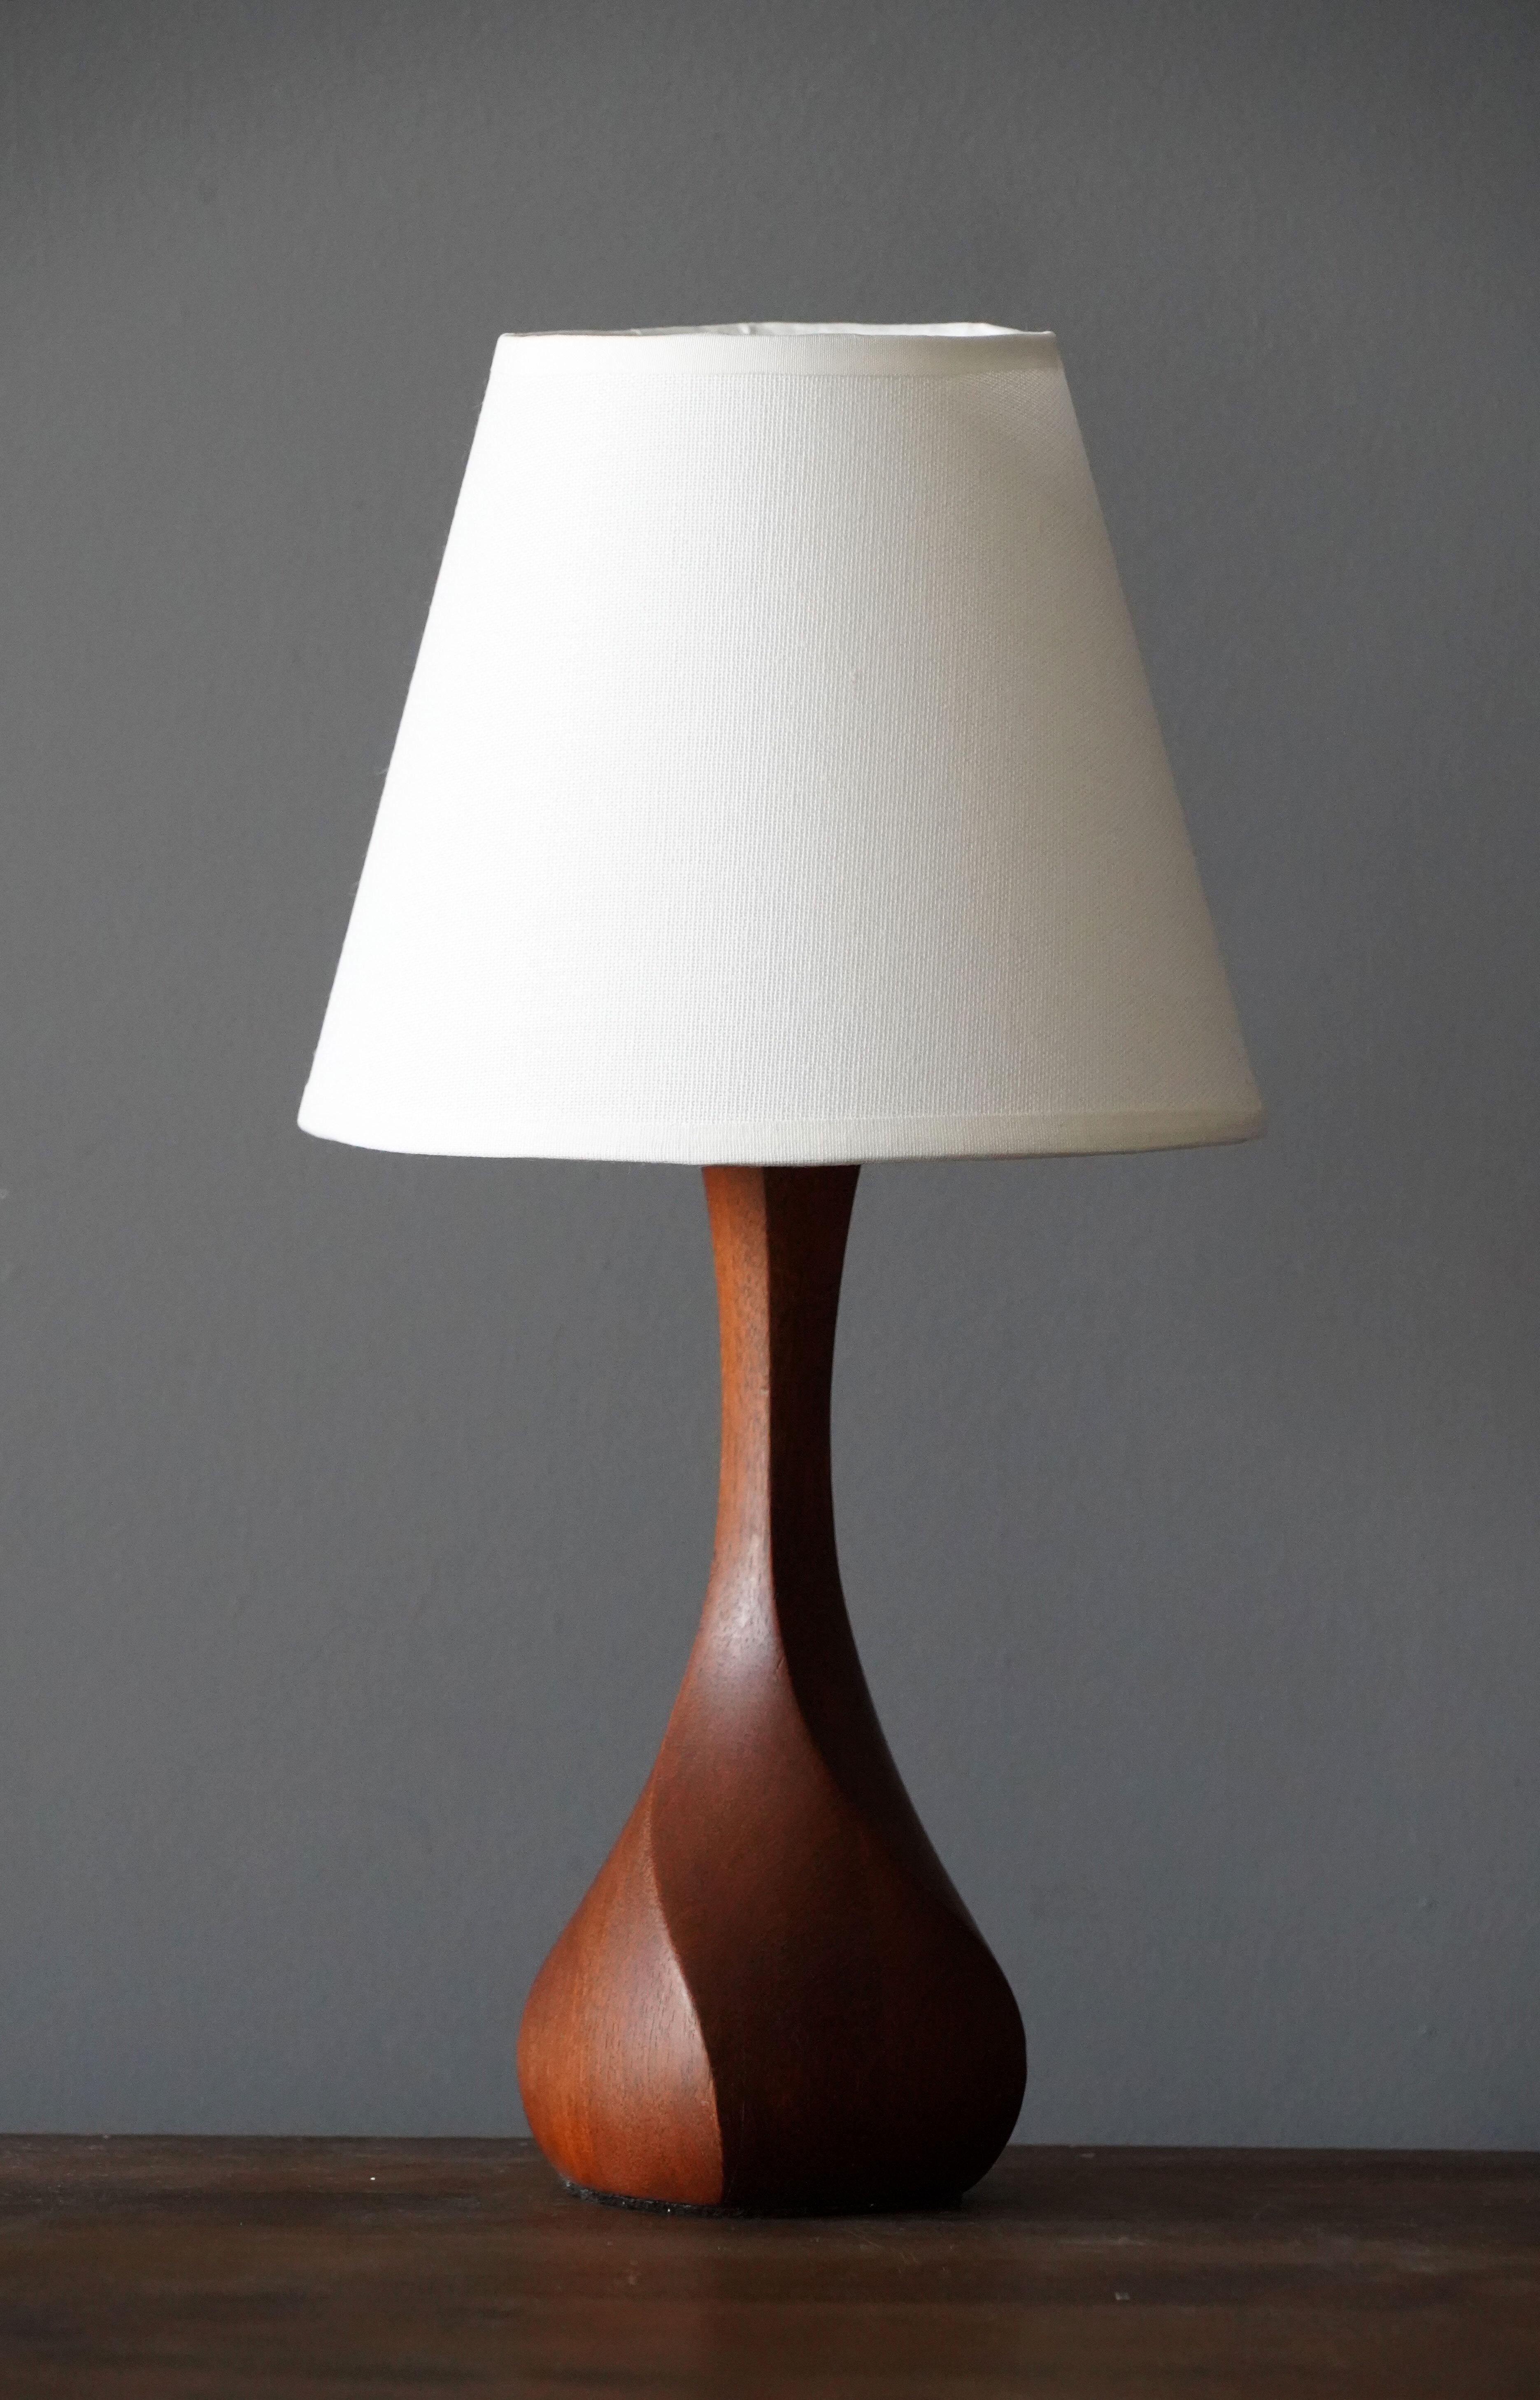 A finely sculpted teak table lamp. Produced in Denmark, 1960s. 

Sold without lampshade. Dimensions without lampshades.

Other designers of the period include Hans Agne Jacobsen, Josef Frank, Palshus, Kaare Klint, and Hans Bergström.